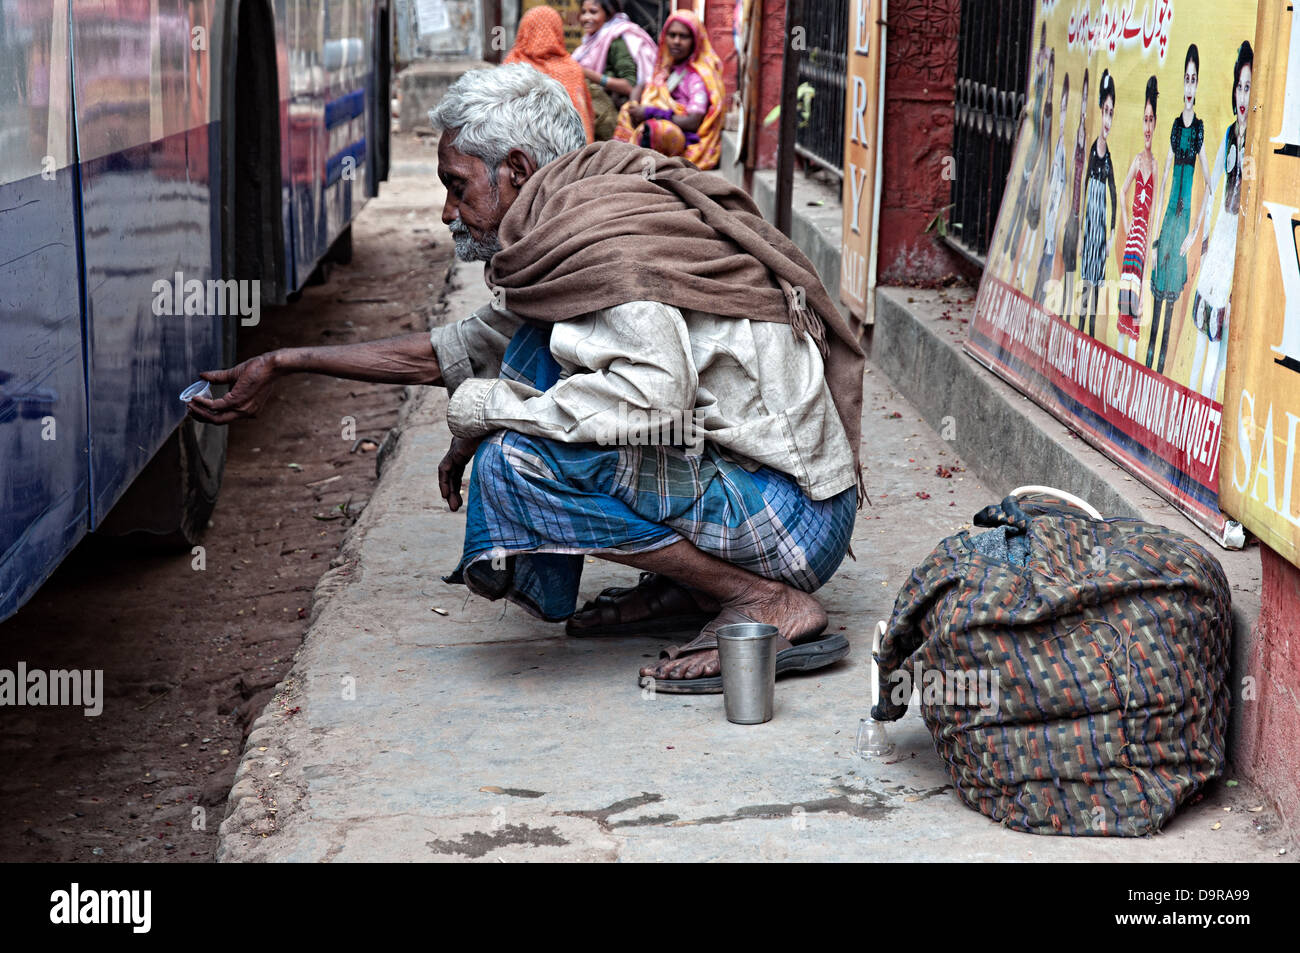 Man in the streets of Calcutta. West Bengal, India Stock Photo